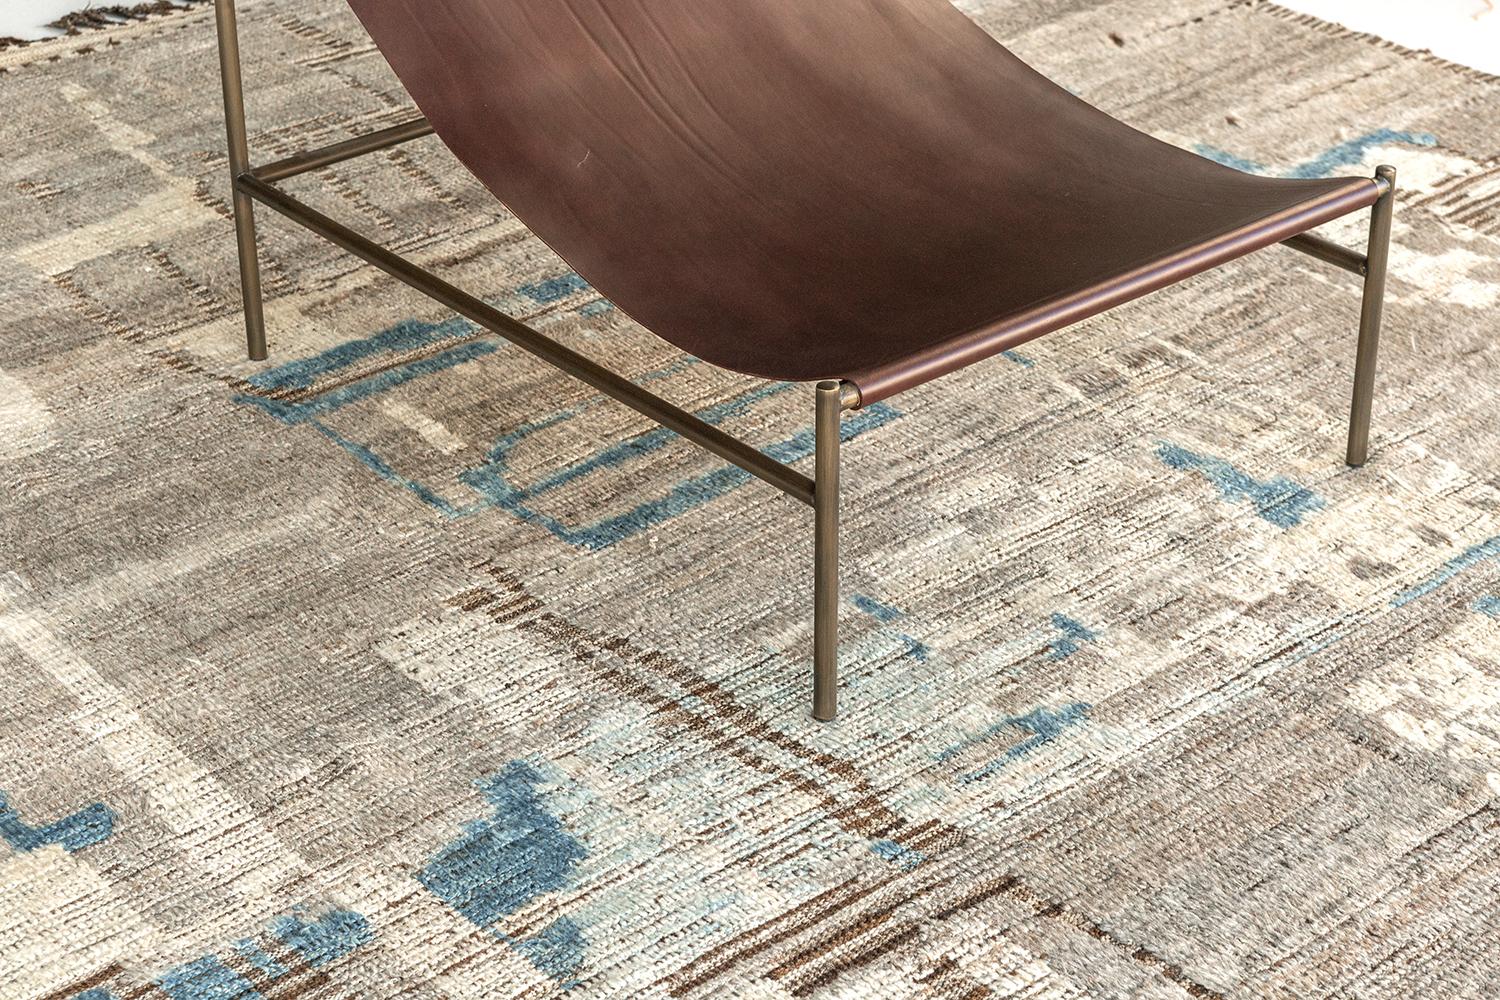 'Meliska' is an exquisitely textured rug with irregular motifs inspired from the Atlas Mountains of Morocco. Earthy tones of ivory and chocolate brown and turquoise surrounded by umber brown shag work cohesively to make for a great contemporary